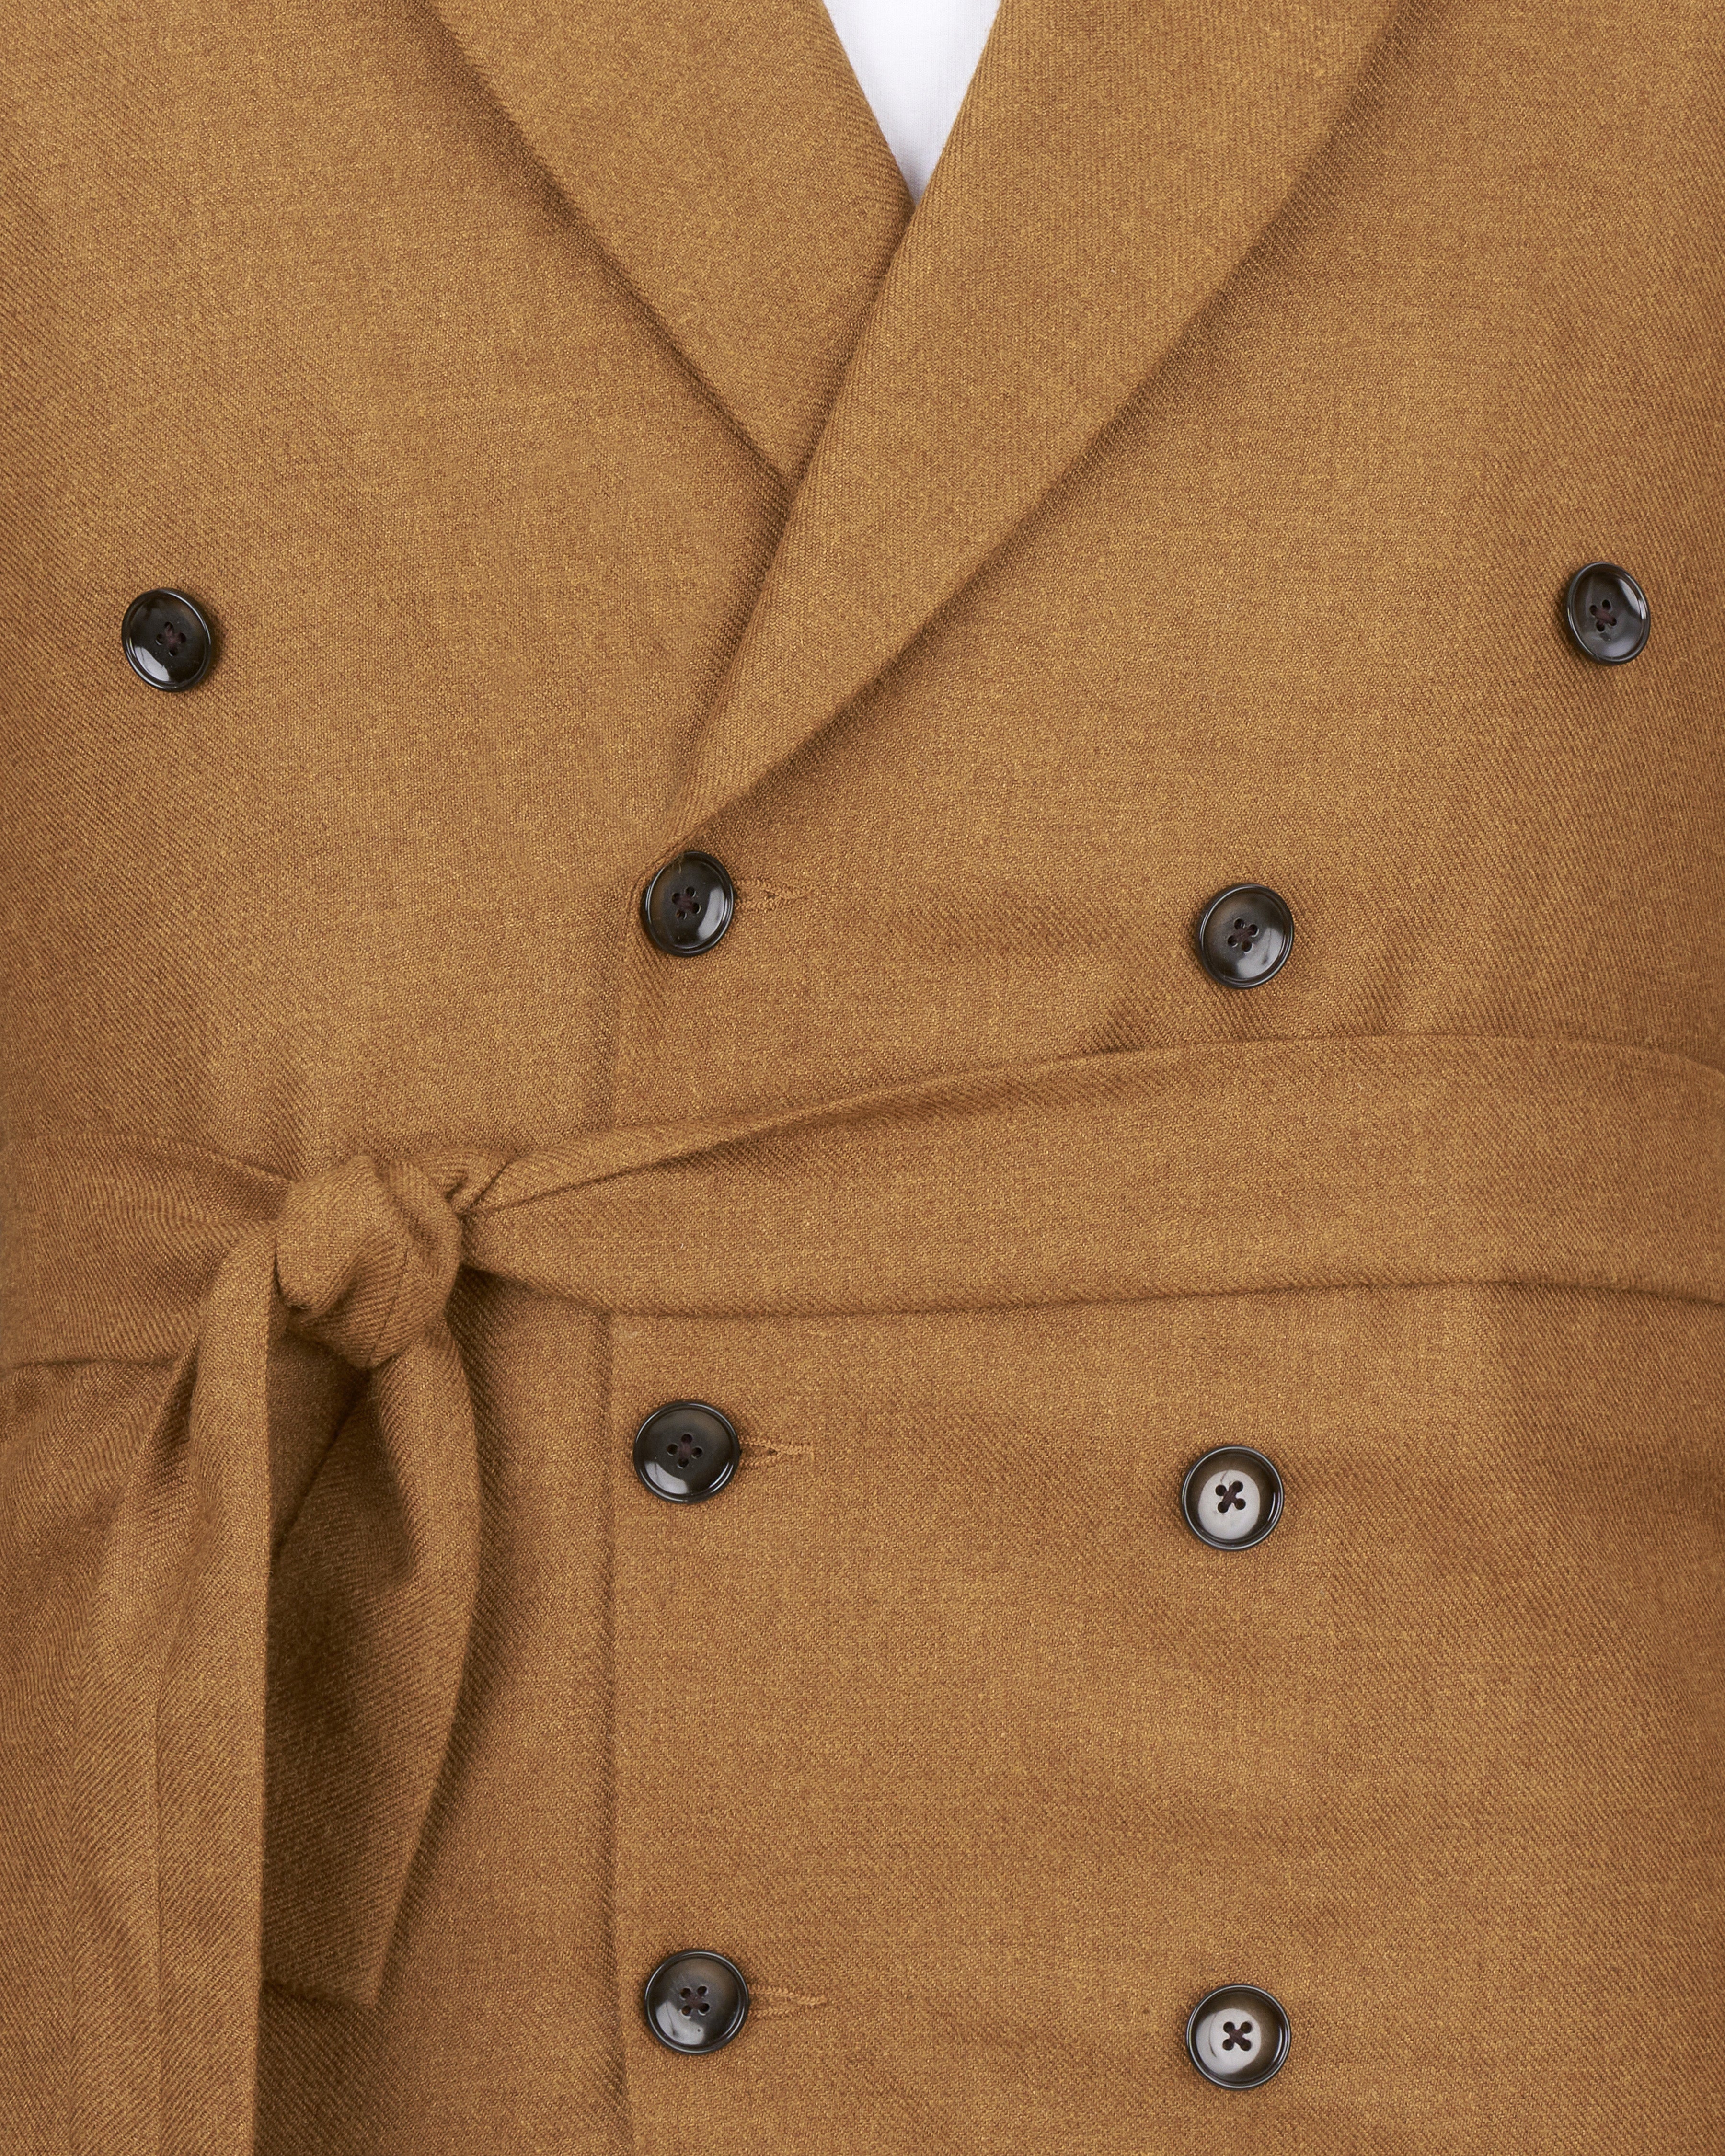 Cape Palliser Brown Wool Rich Double Breasted Trench Coat With Pants TCPT2530-DB-D35-36, TCPT2530-DB-D35-38, TCPT2530-DB-D35-40, TCPT2530-DB-D35-42, TCPT2530-DB-D35-44, TCPT2530-DB-D35-46, TCPT2530-DB-D35-48, TCPT2530-DB-D35-50, TCPT2530-DB-D35-T2, TCPT2530-DB-D35-54, TCPT2530-DB-D35-56, TCPT2530-DB-D35-58, TCPT2530-DB-D35-60